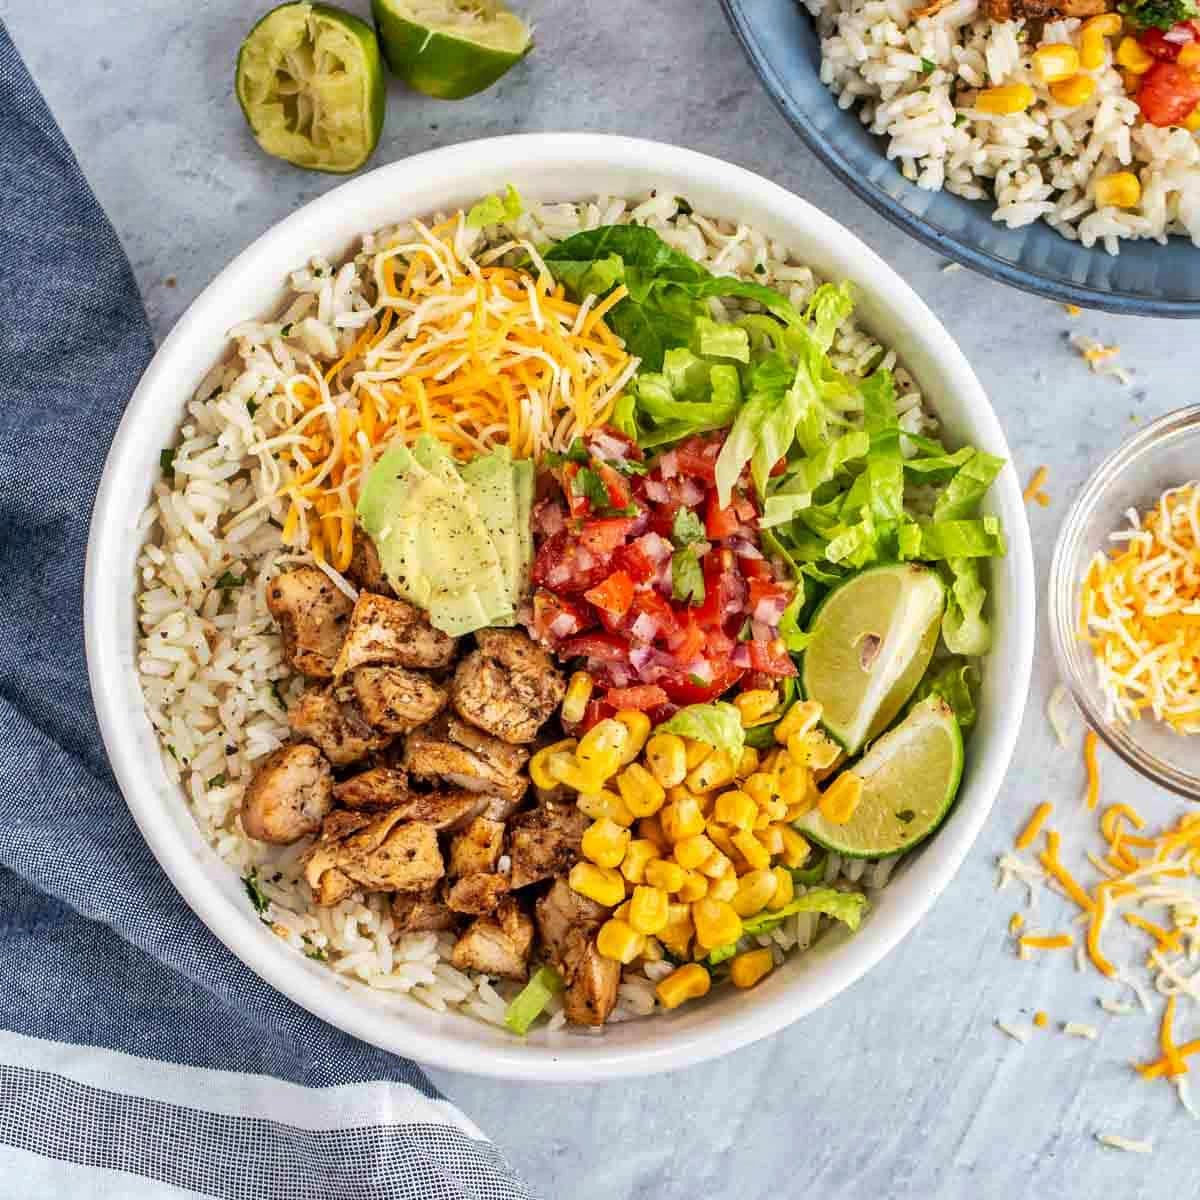 What Is In A Chipotle Bowl